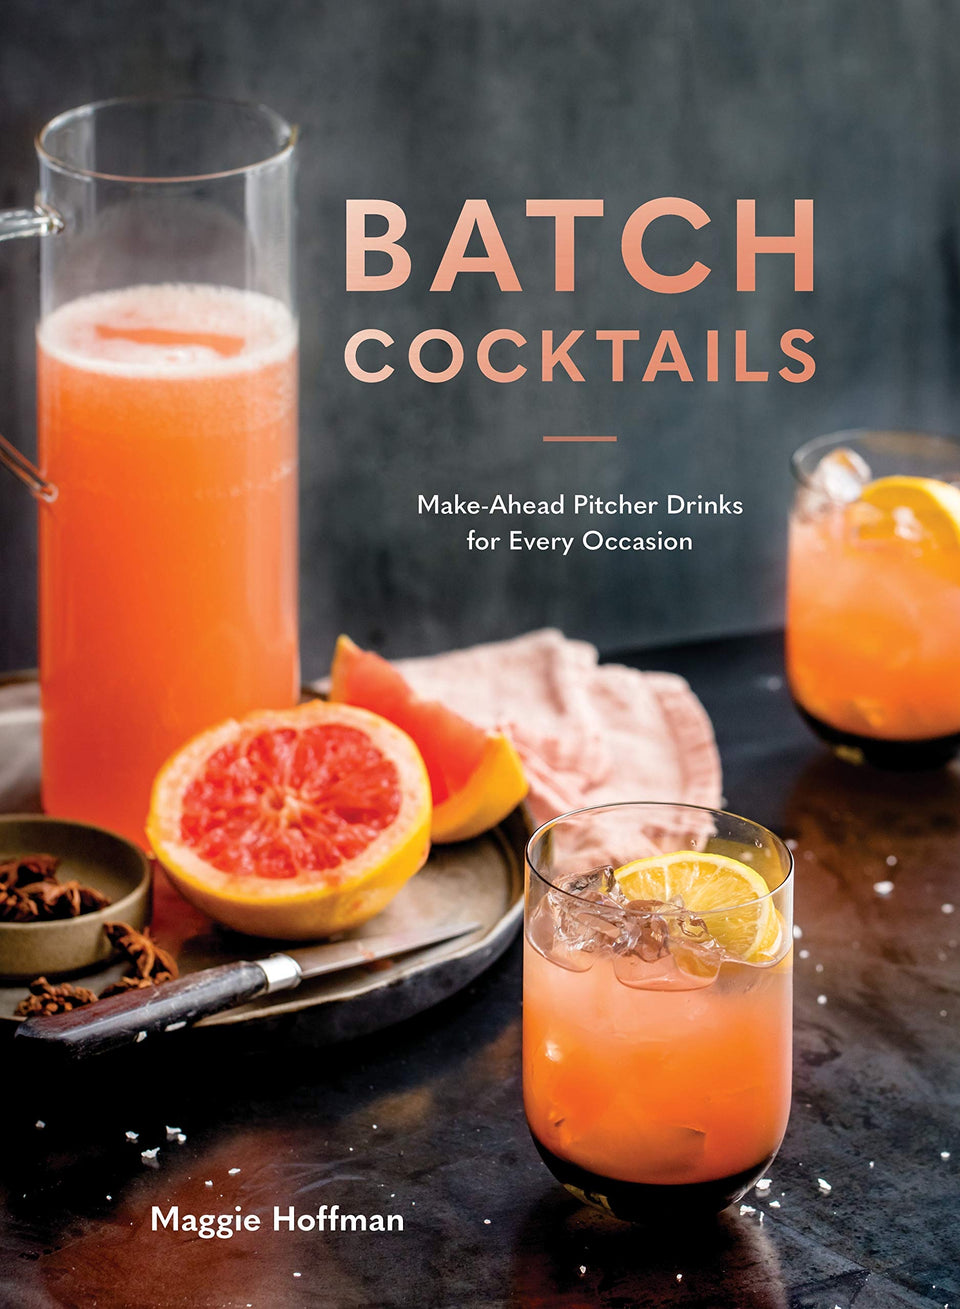 Batch Cocktail: Make-Ahead Pitcher Drinks for Every Occasion